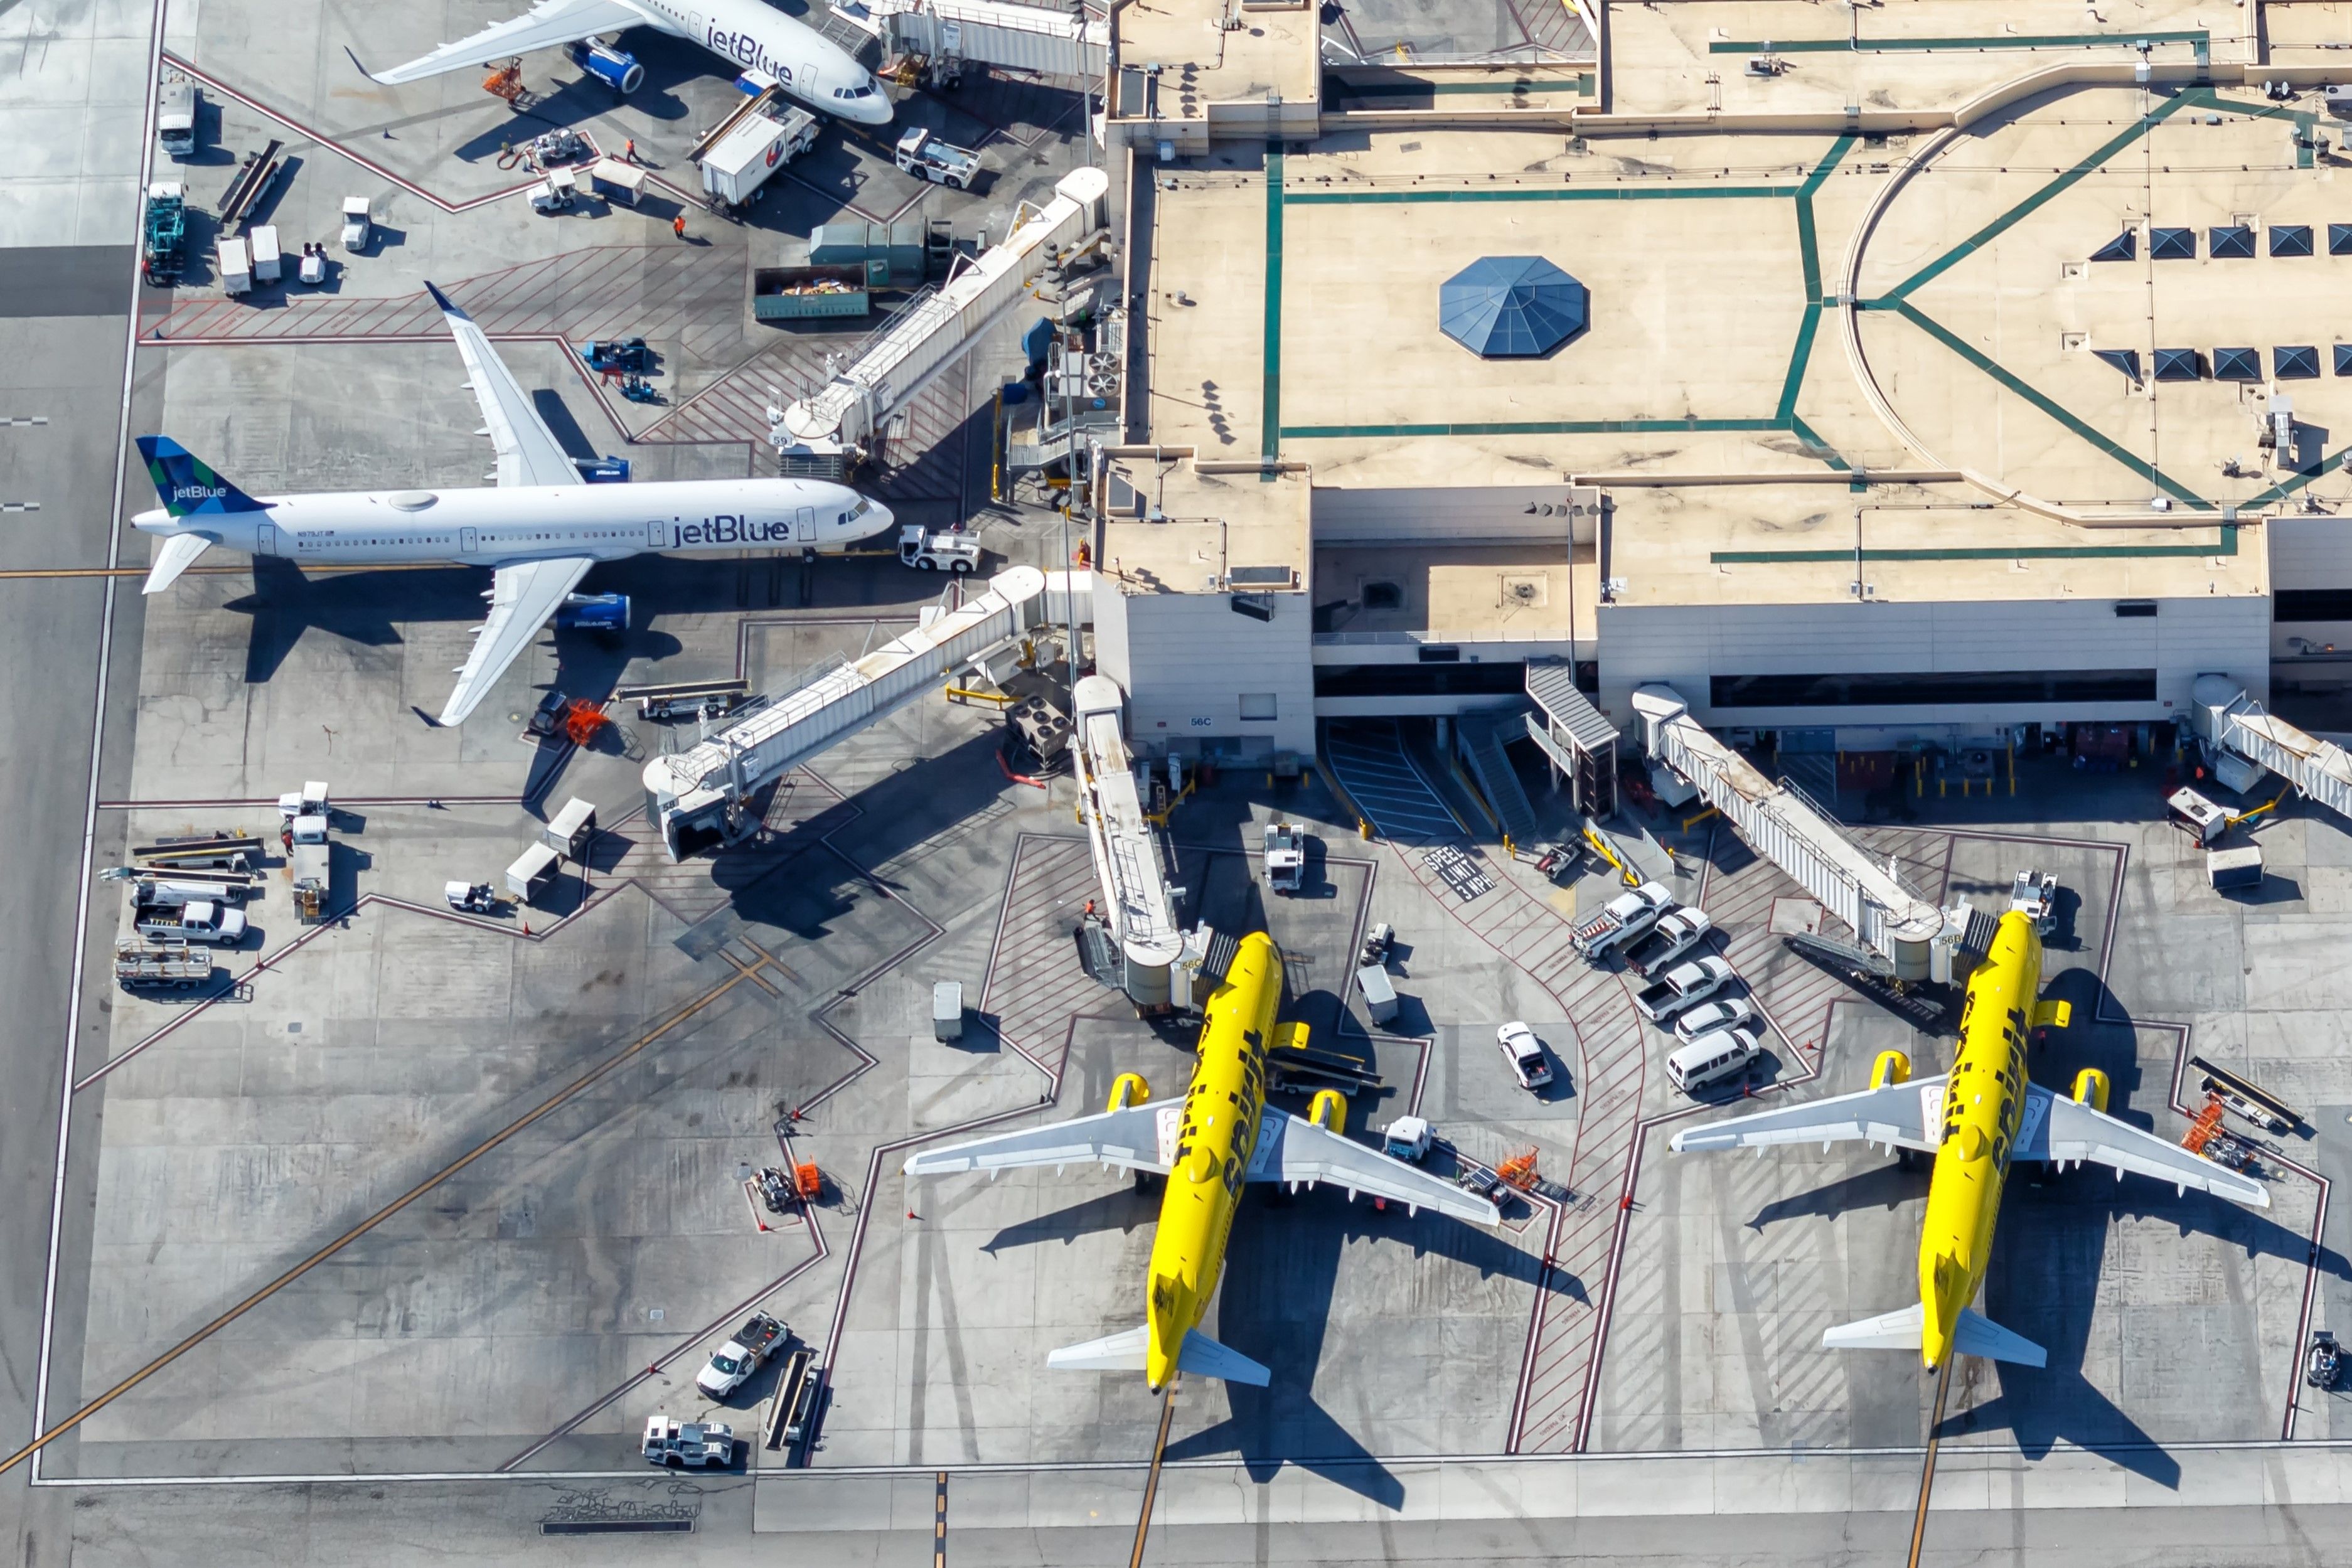 shutterstock_2413840295 (4x6 crop) - Los Angeles, United States - November 4, 2022: Airplanes from jetBlue and Spirit Airlines at Los Angeles Airport (LAX) aerial view in the United States.